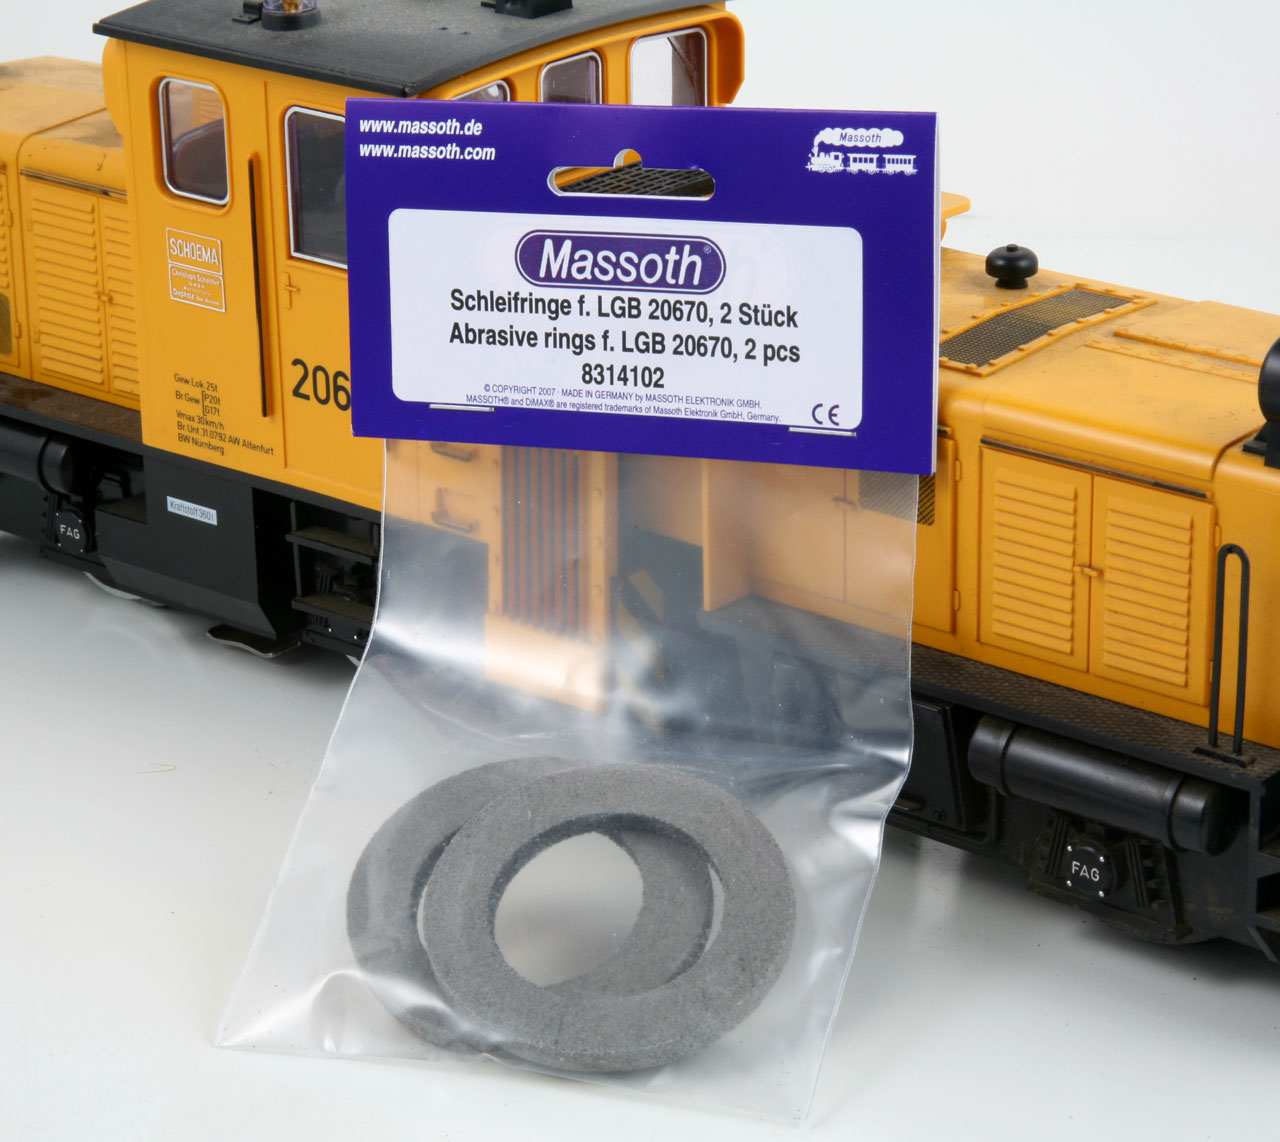 Massoth 8314102 Abrasive Rings for track cleaning LGB Loco 20670